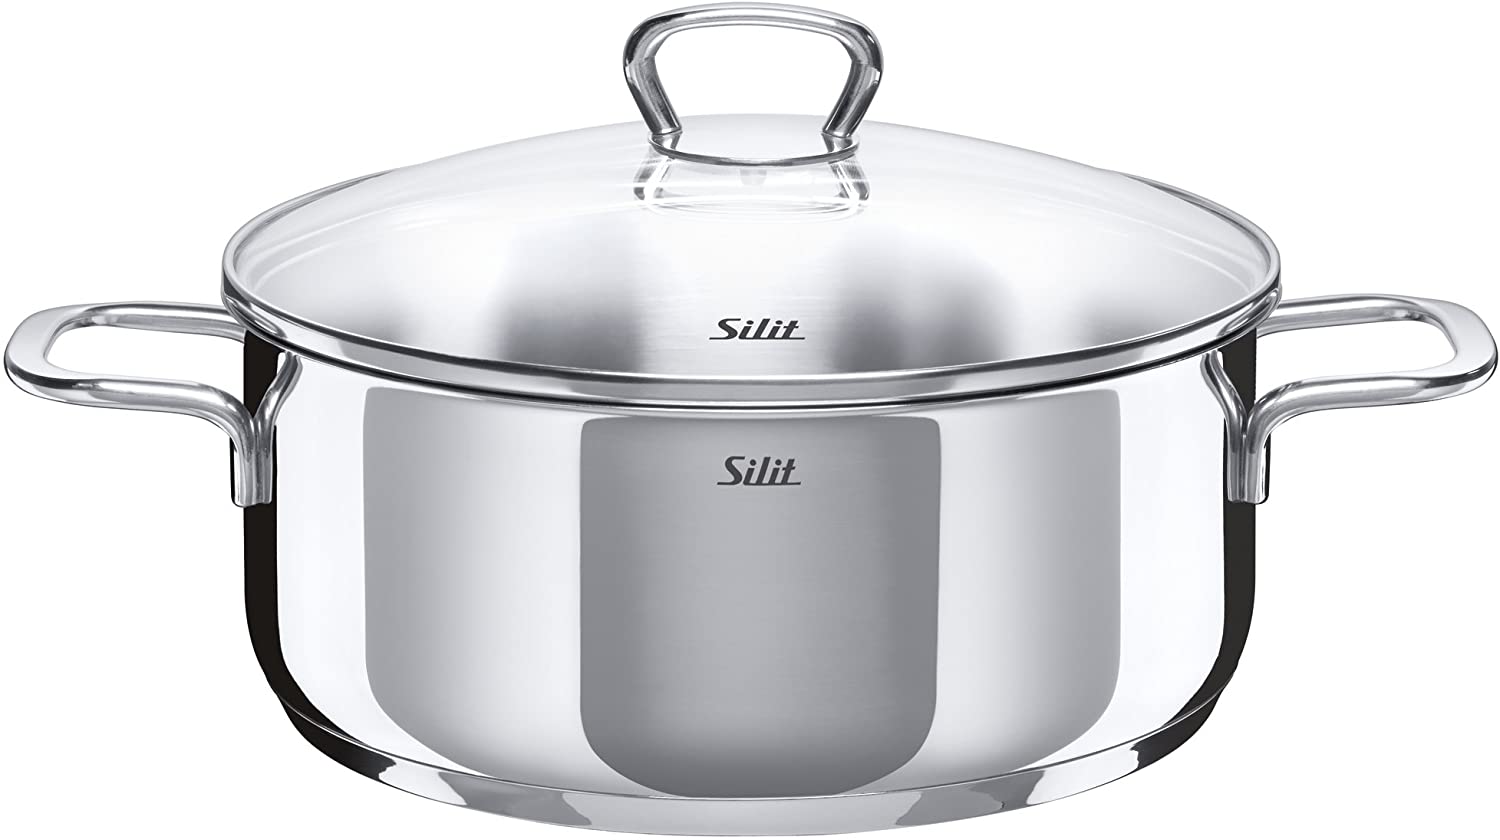 Silit Crystal Stainless Steel Casserole Pot Dishwasher-Safe Suitable for Induction Cookers Easy to Clean, silver, 24cm